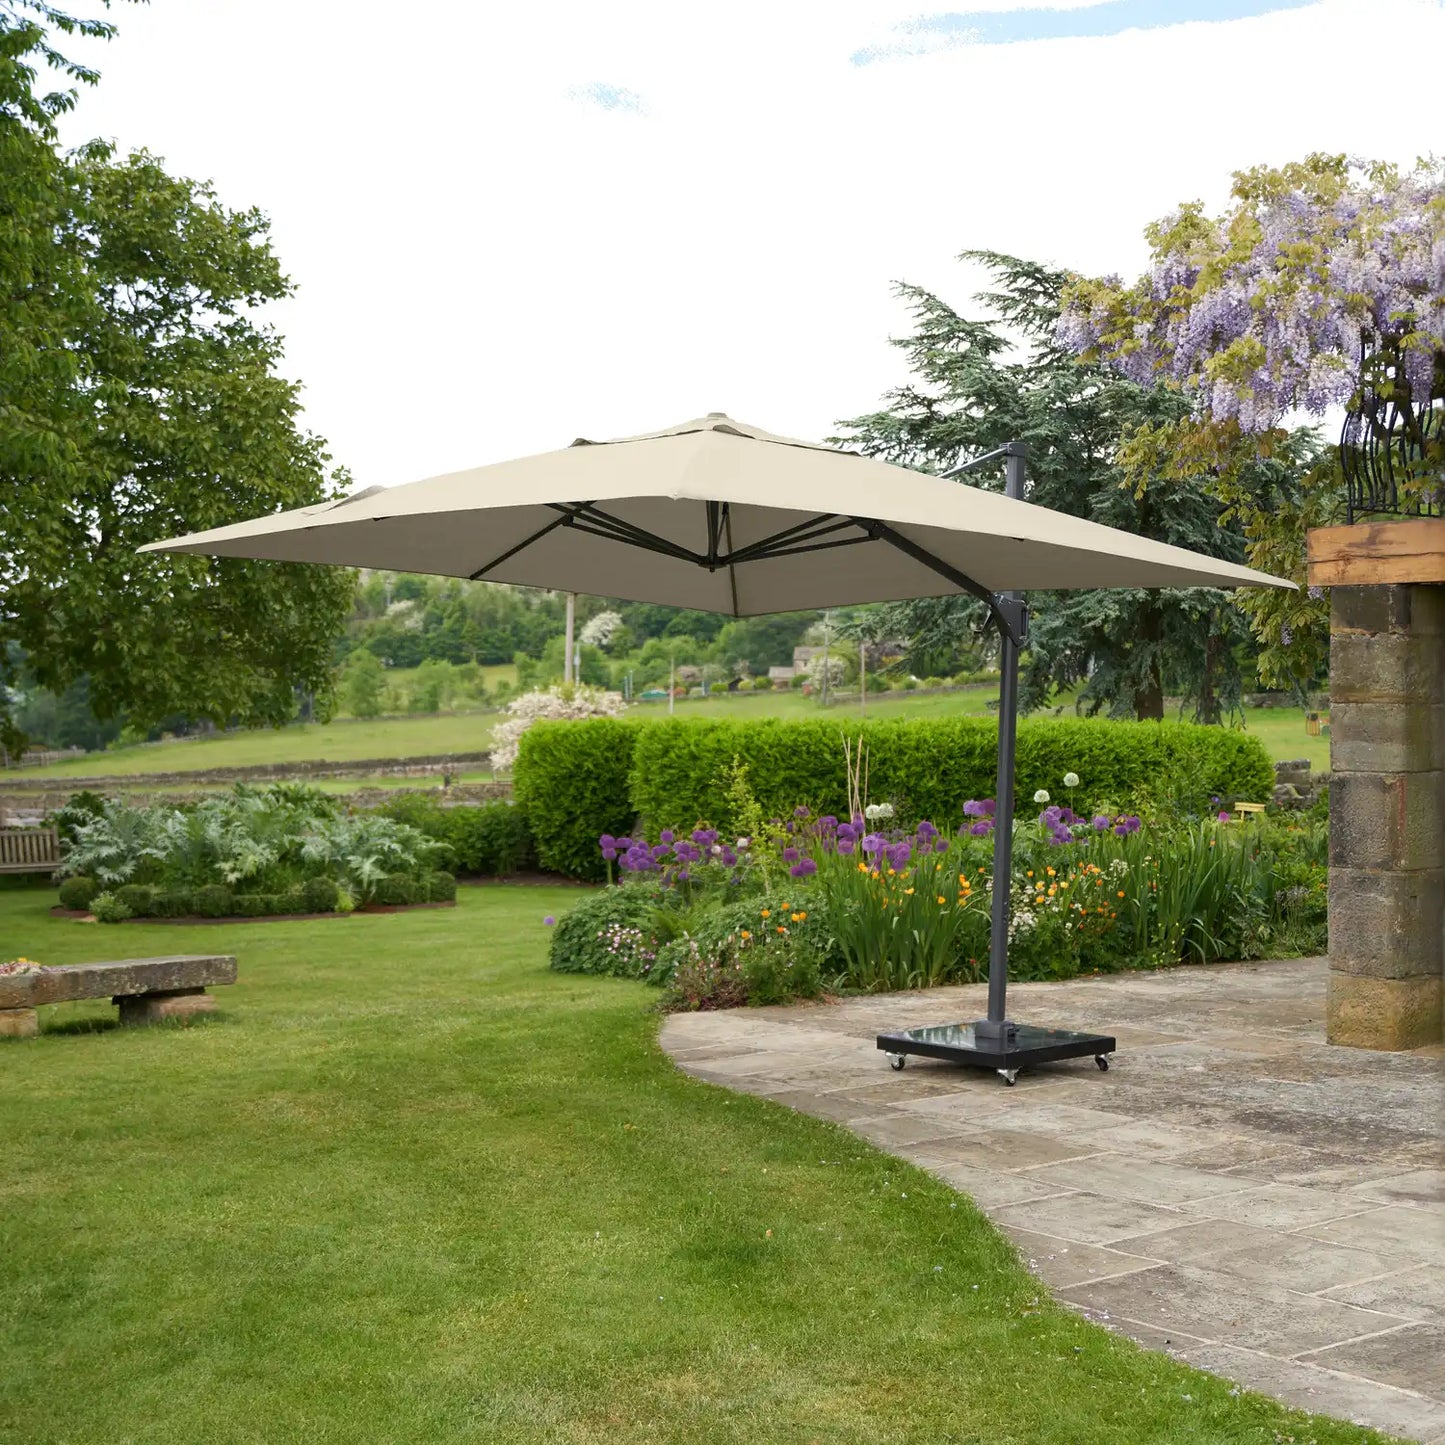 Platinum Challenger T2 3m Square Cantilever Parasol in Champagne – Click Style